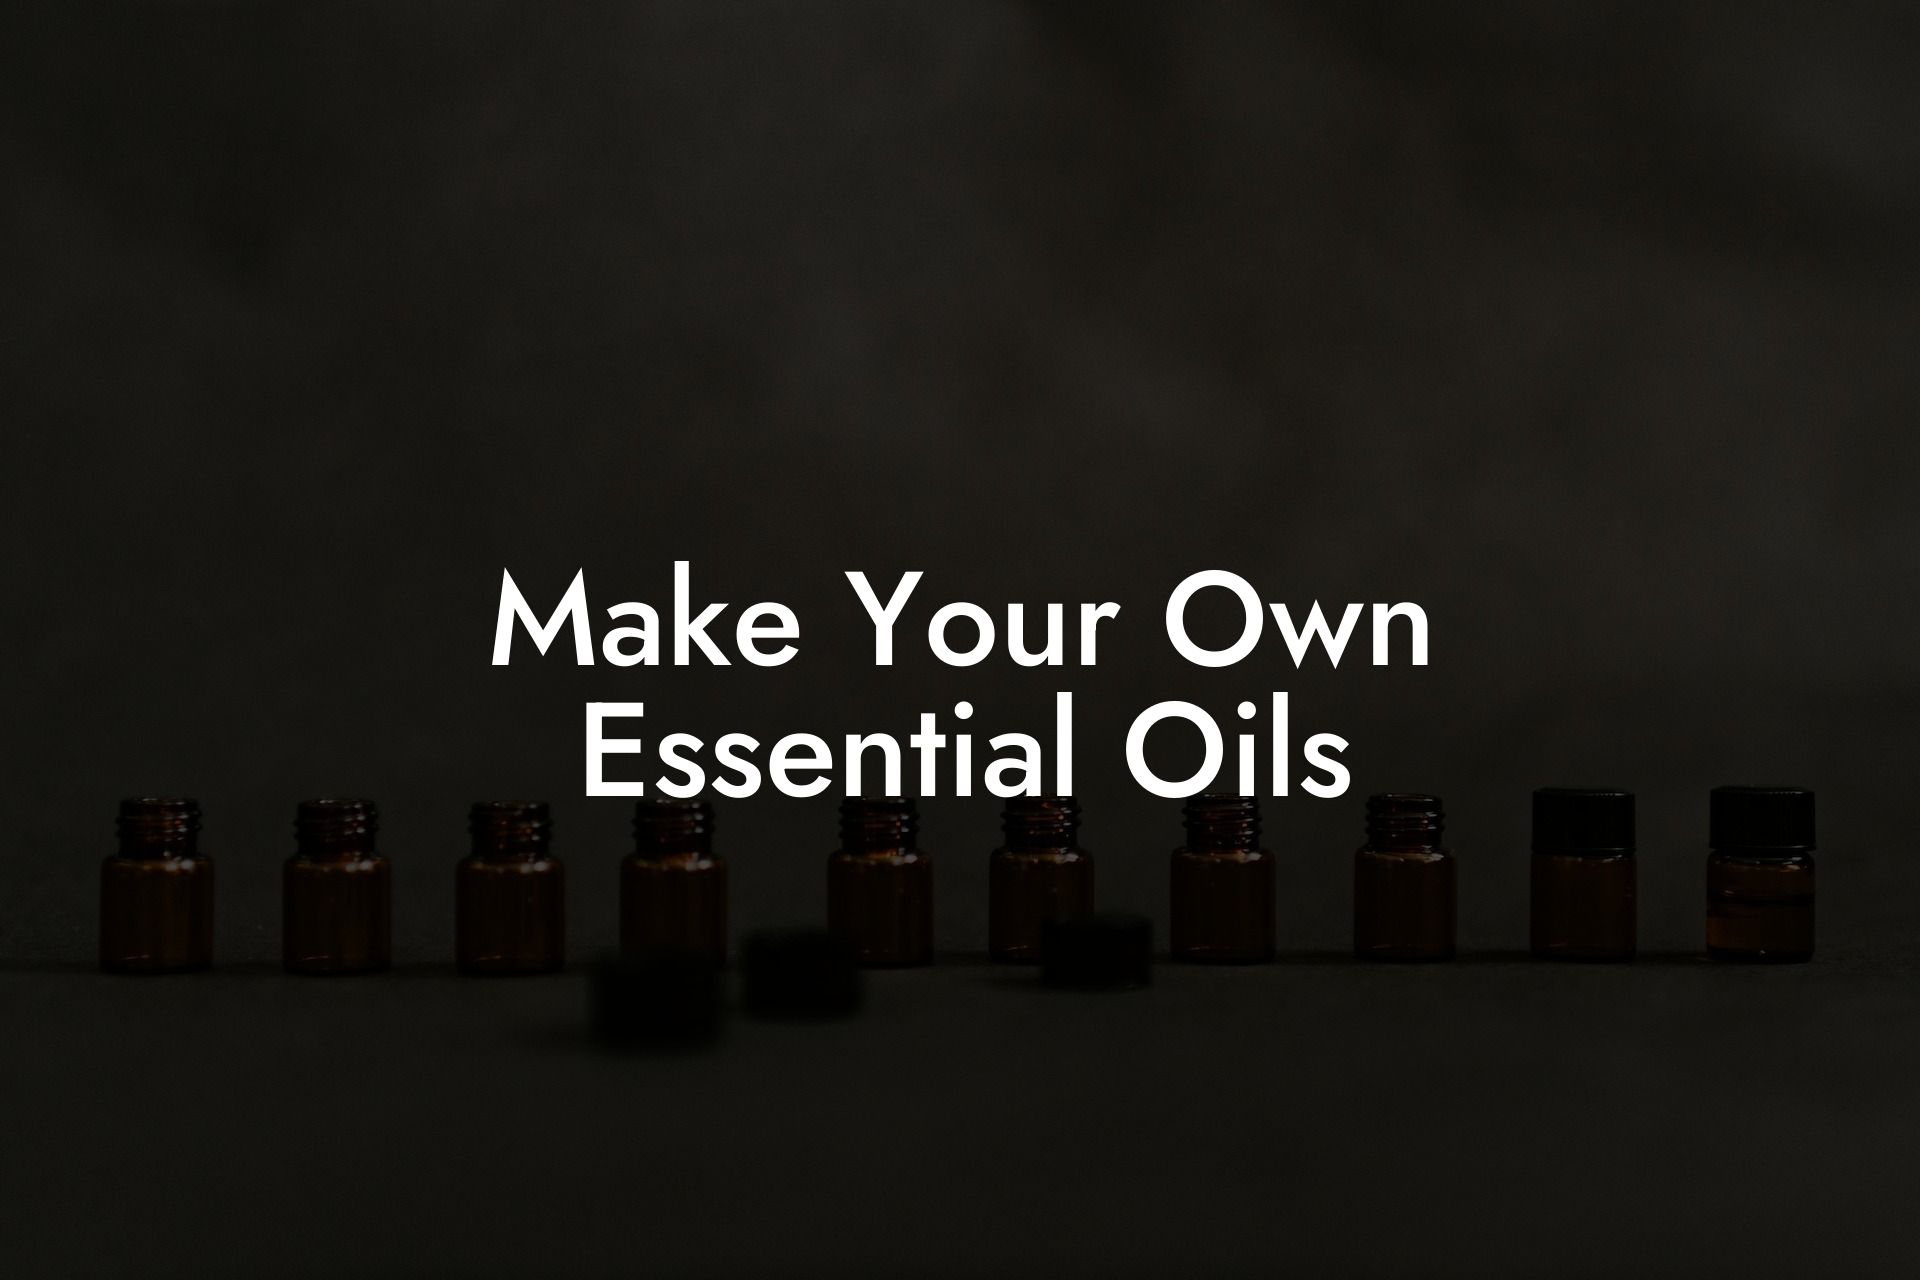 Make Your Own Essential Oils